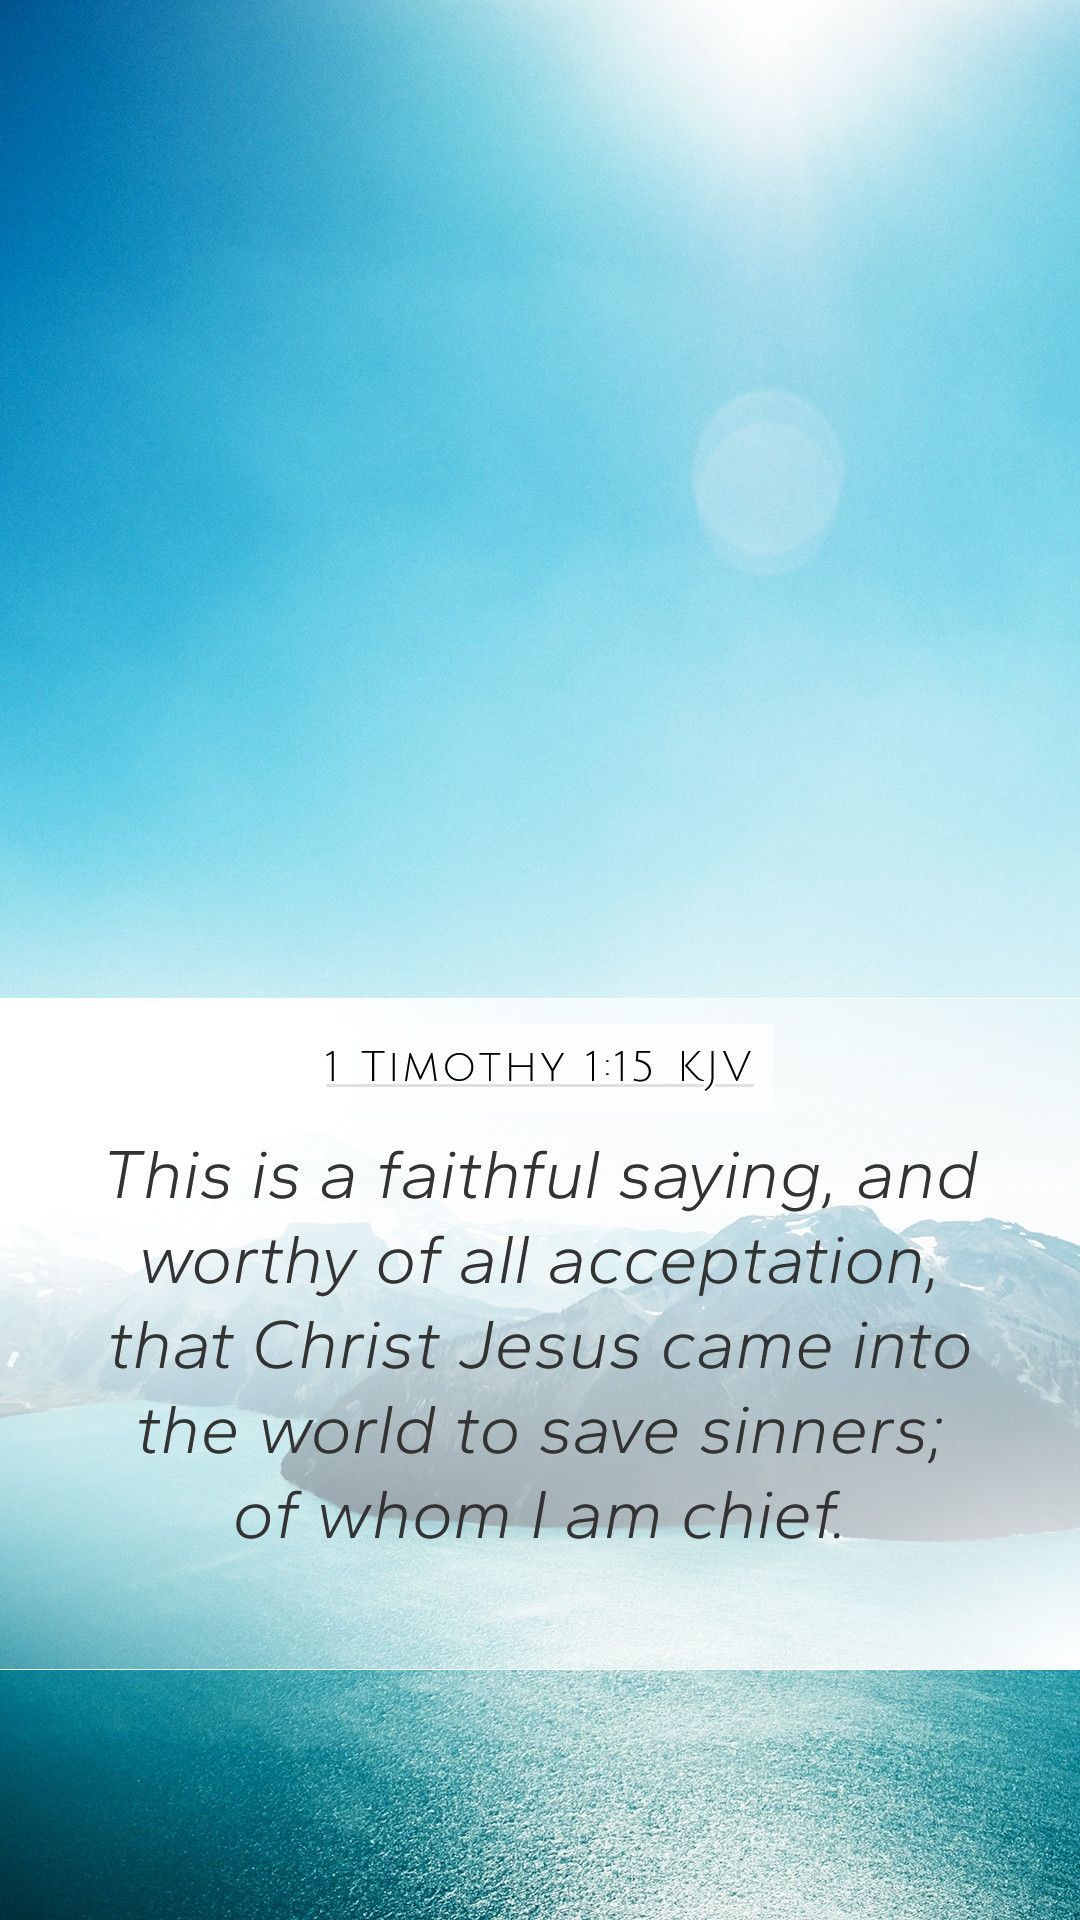 Timothy 1:15 KJV Mobile Phone Wallpaper is a faithful saying, and worthy of all